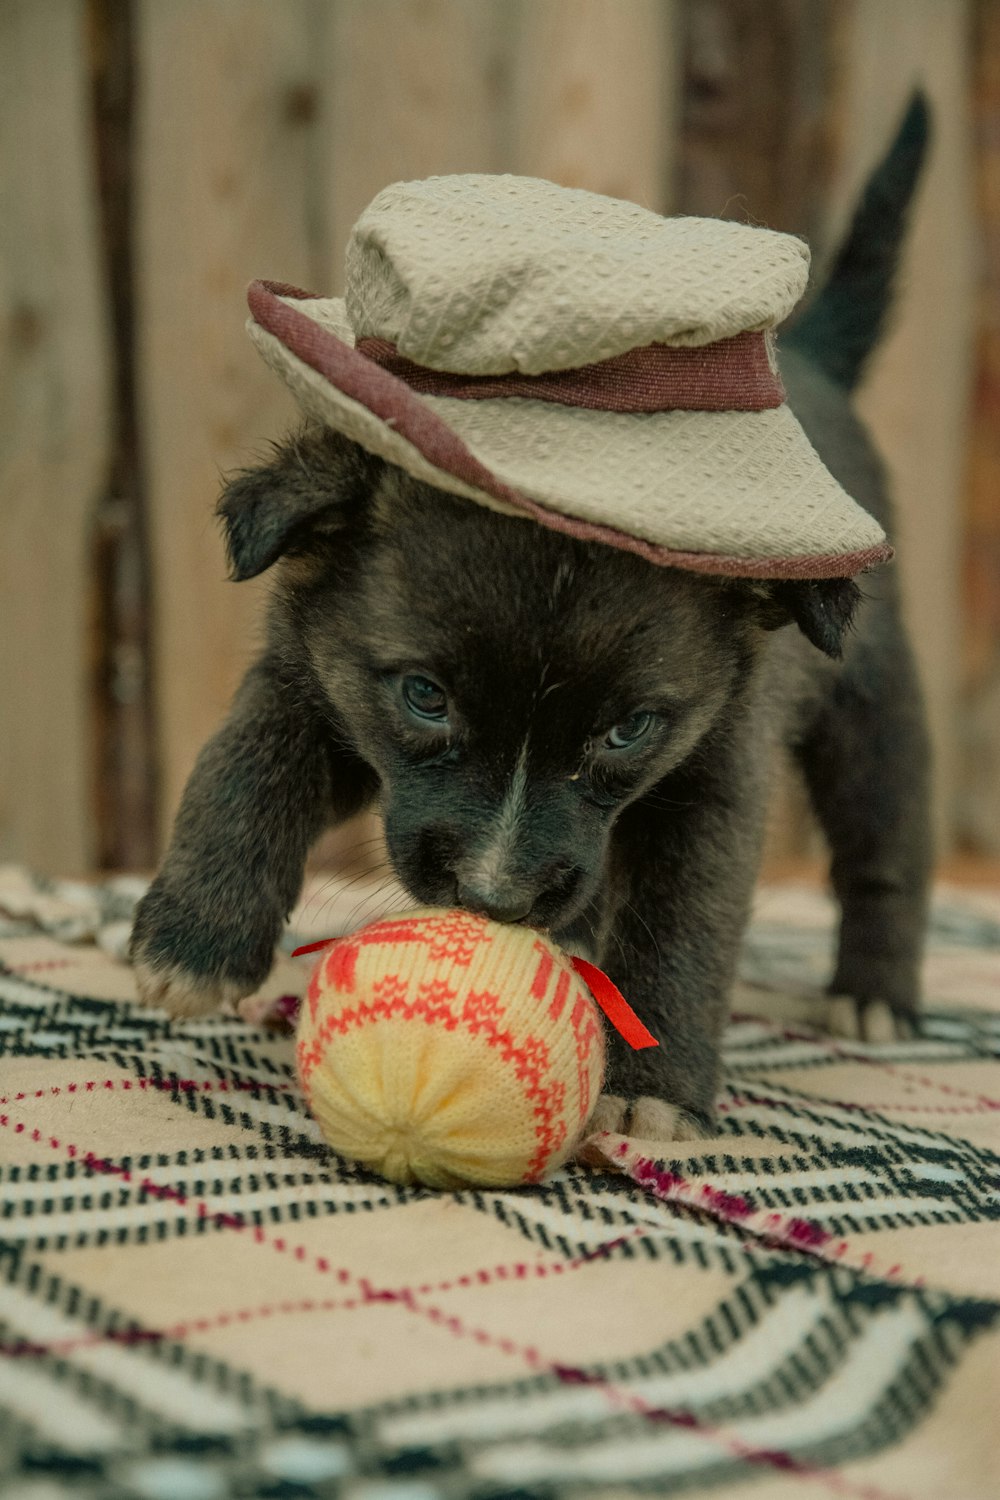 a small dog wearing a hat playing with a ball